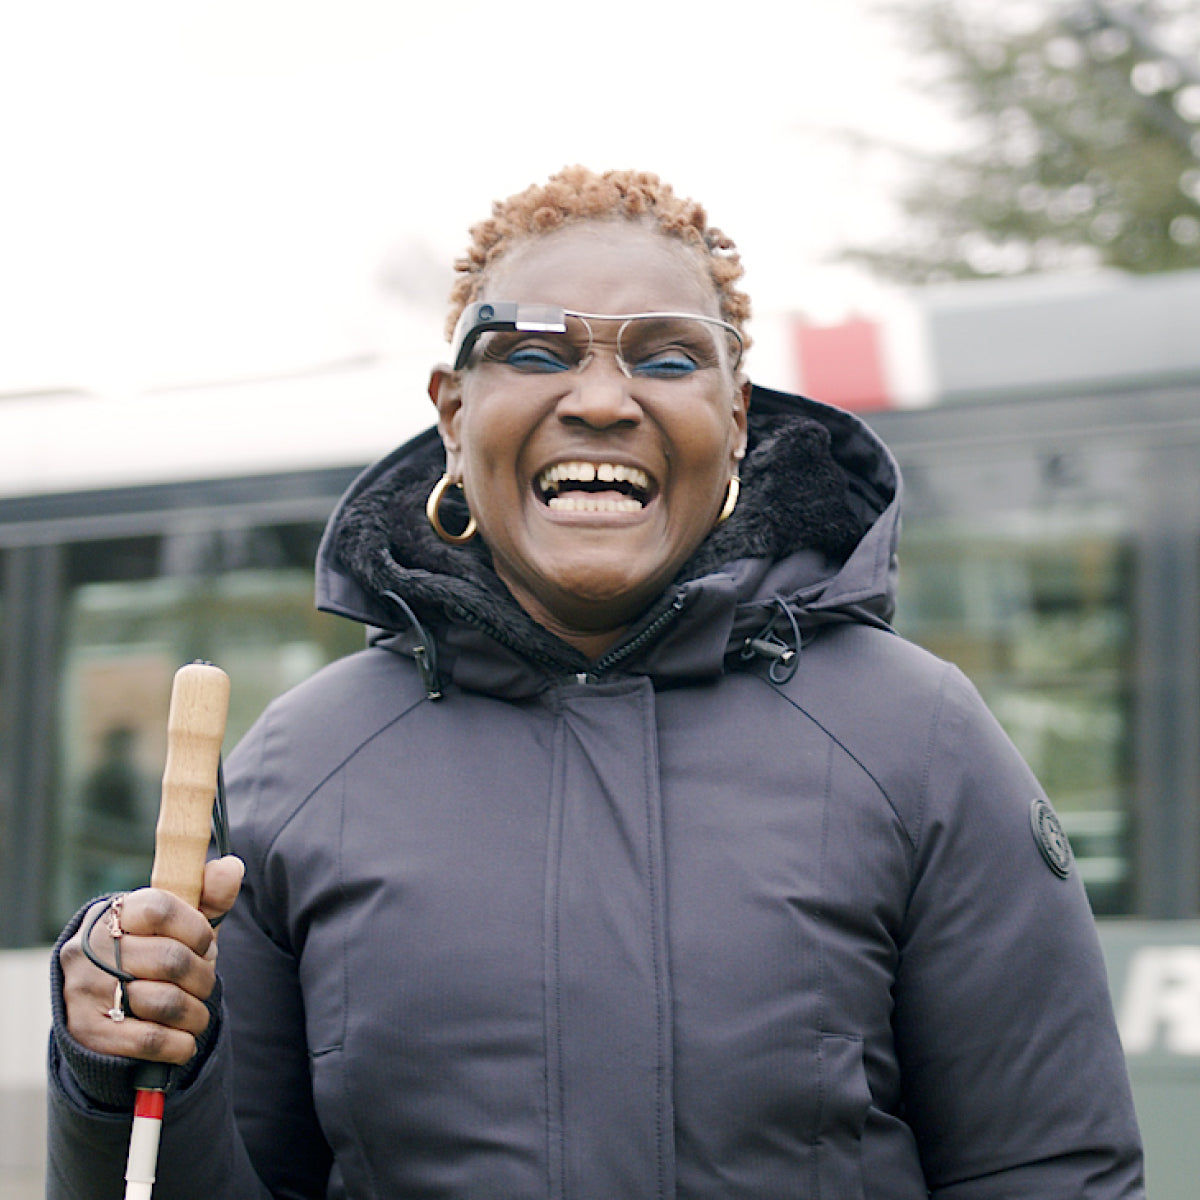 A photo of Joy who's wearing the Envision Glasses with the titanium frames and holding a white cane on her right hand while facing towards the camera.